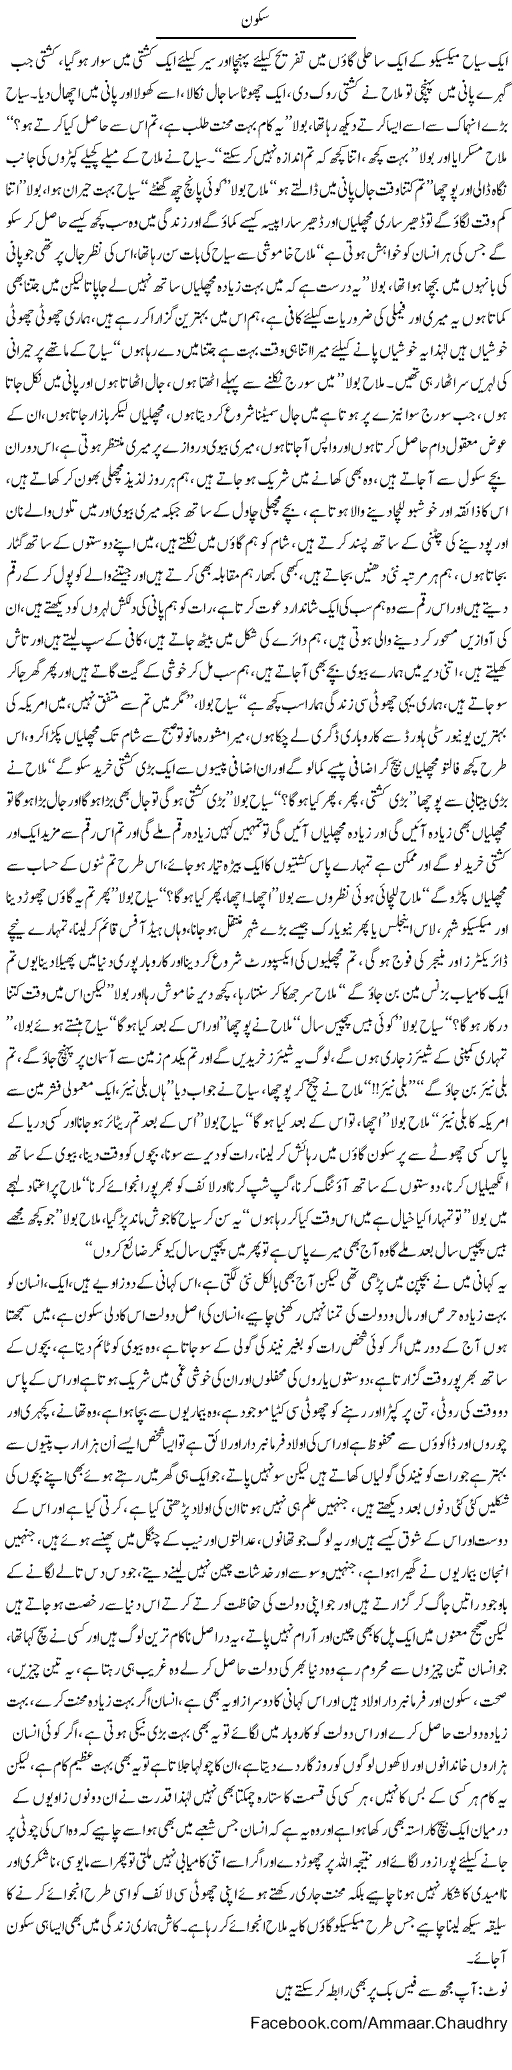 Real Peace Express Column Amar Chaudhry 11 September 2011